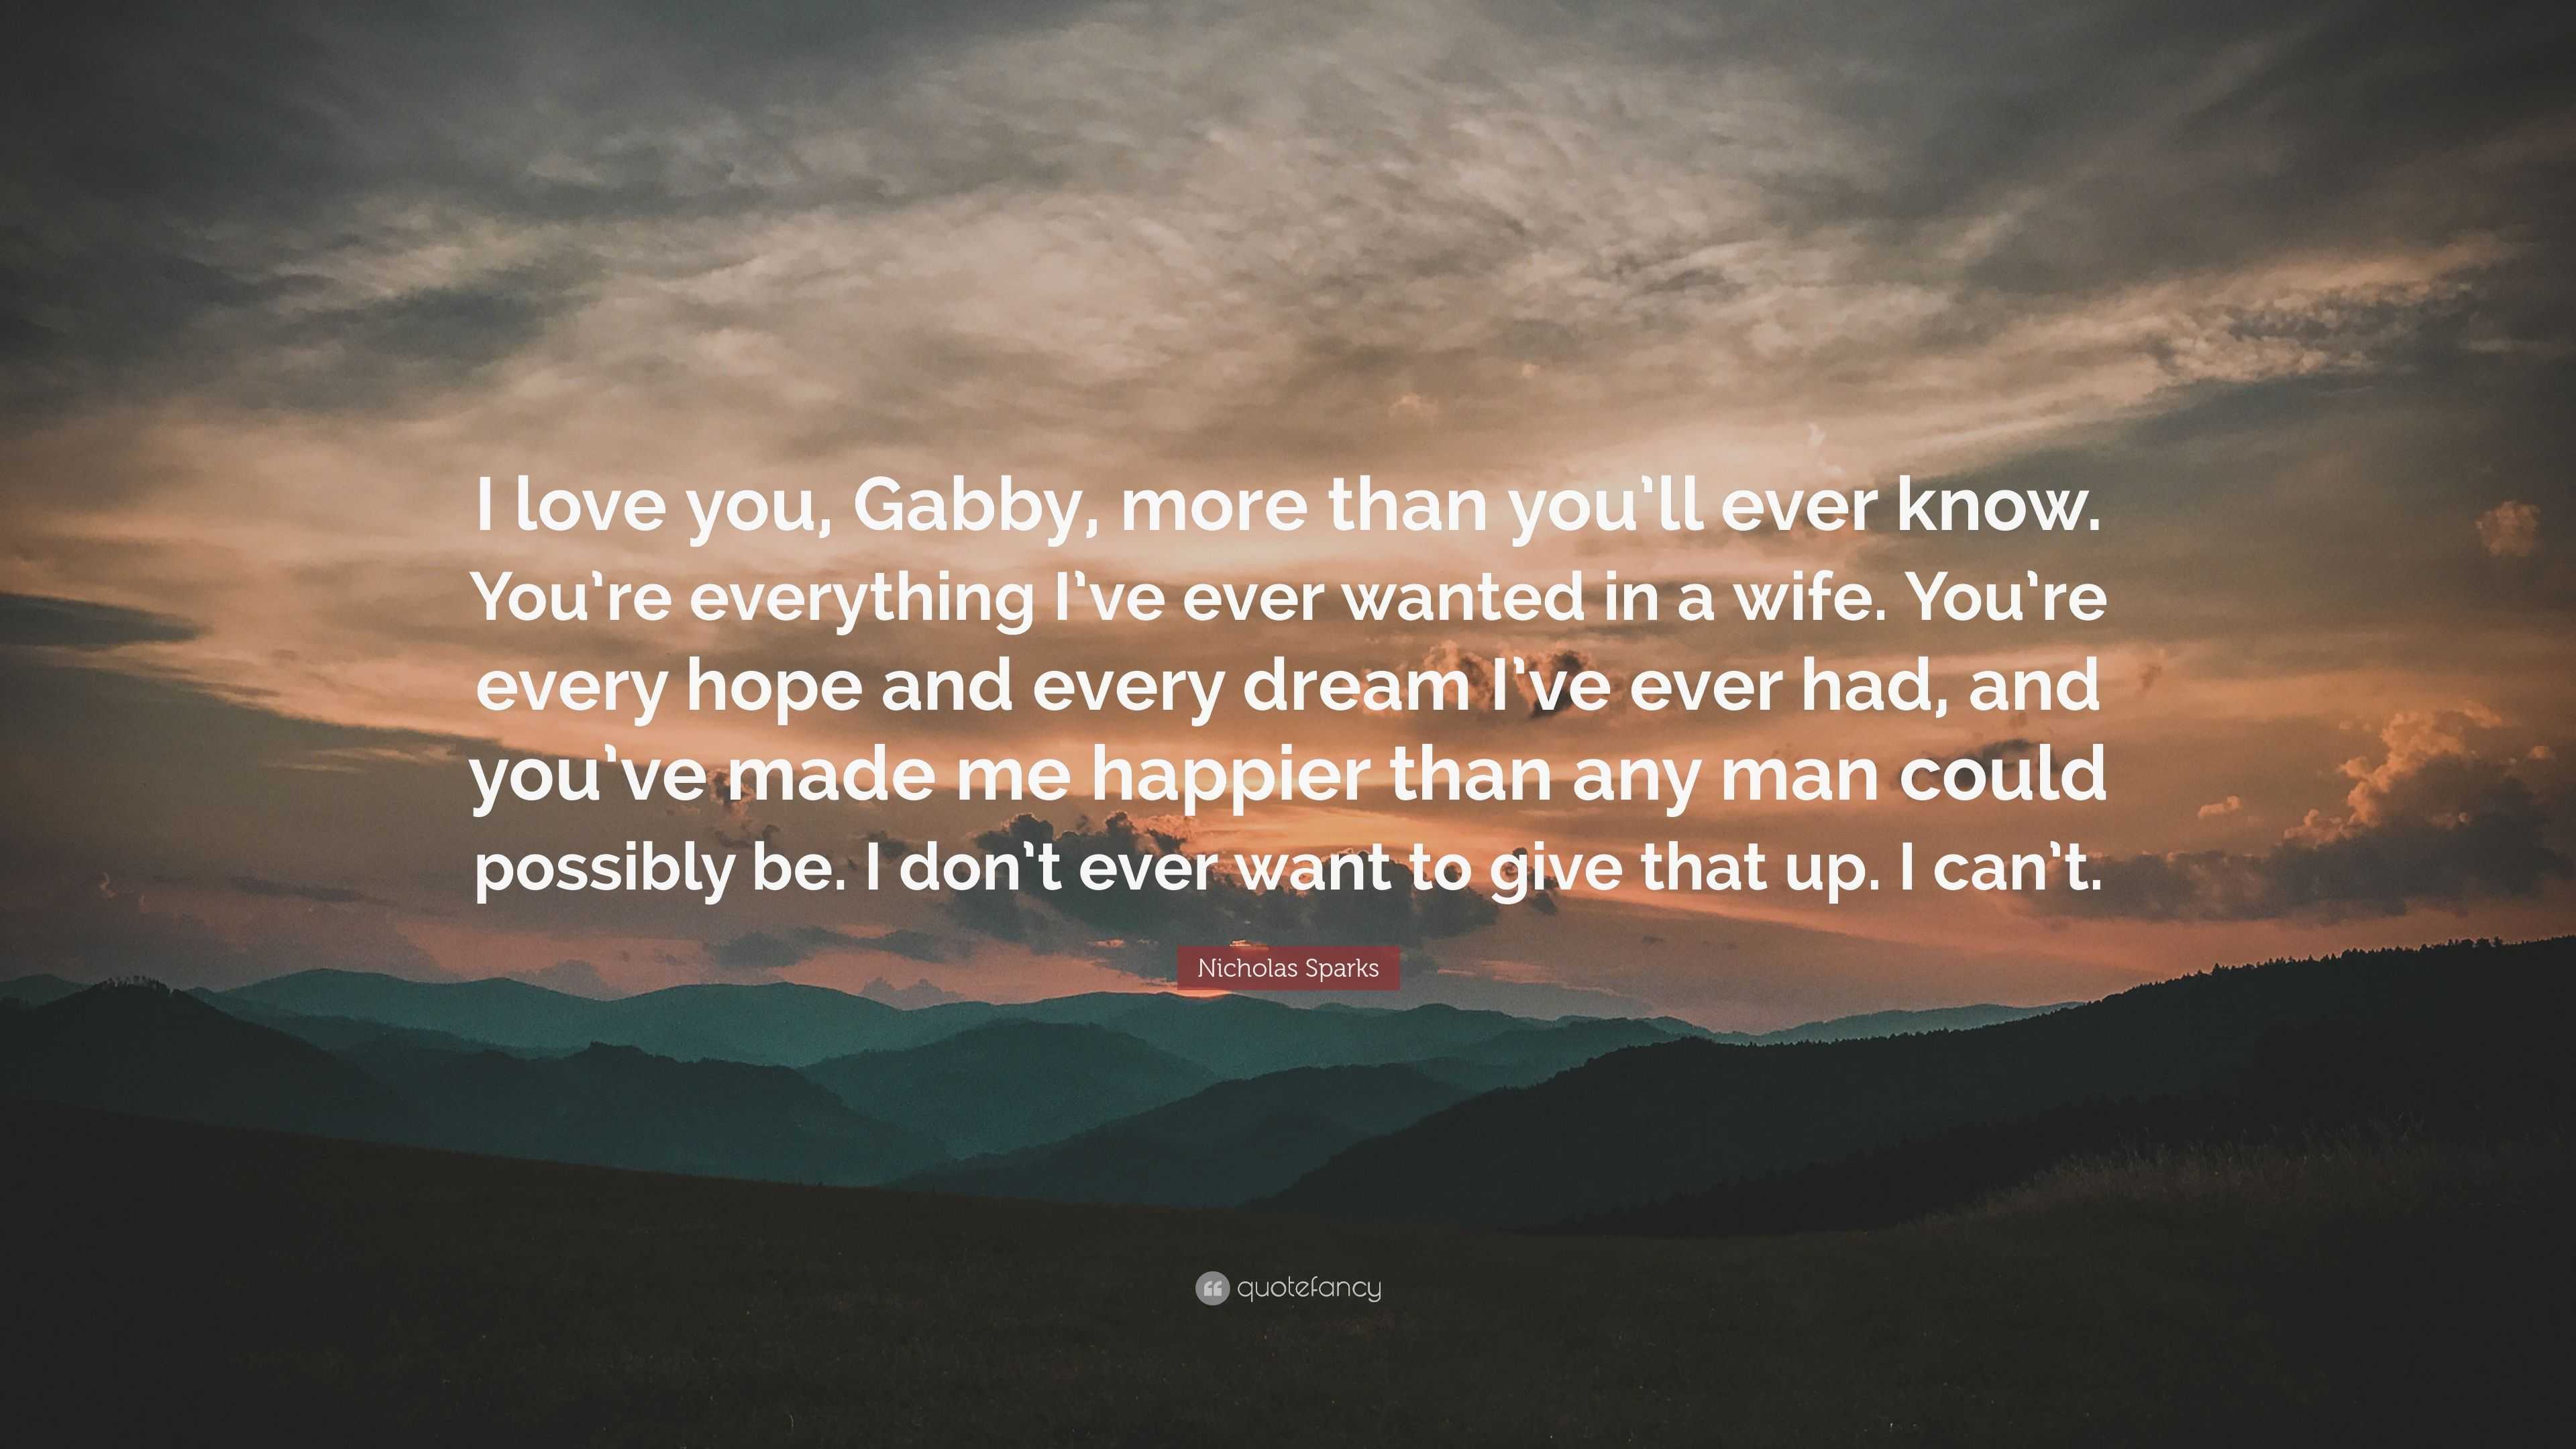 Nicholas Sparks Quote I Love You Gabby More Than You Ll Ever Know You Re Everything I Ve Ever Wanted In A Wife You Re Every Hope And Every